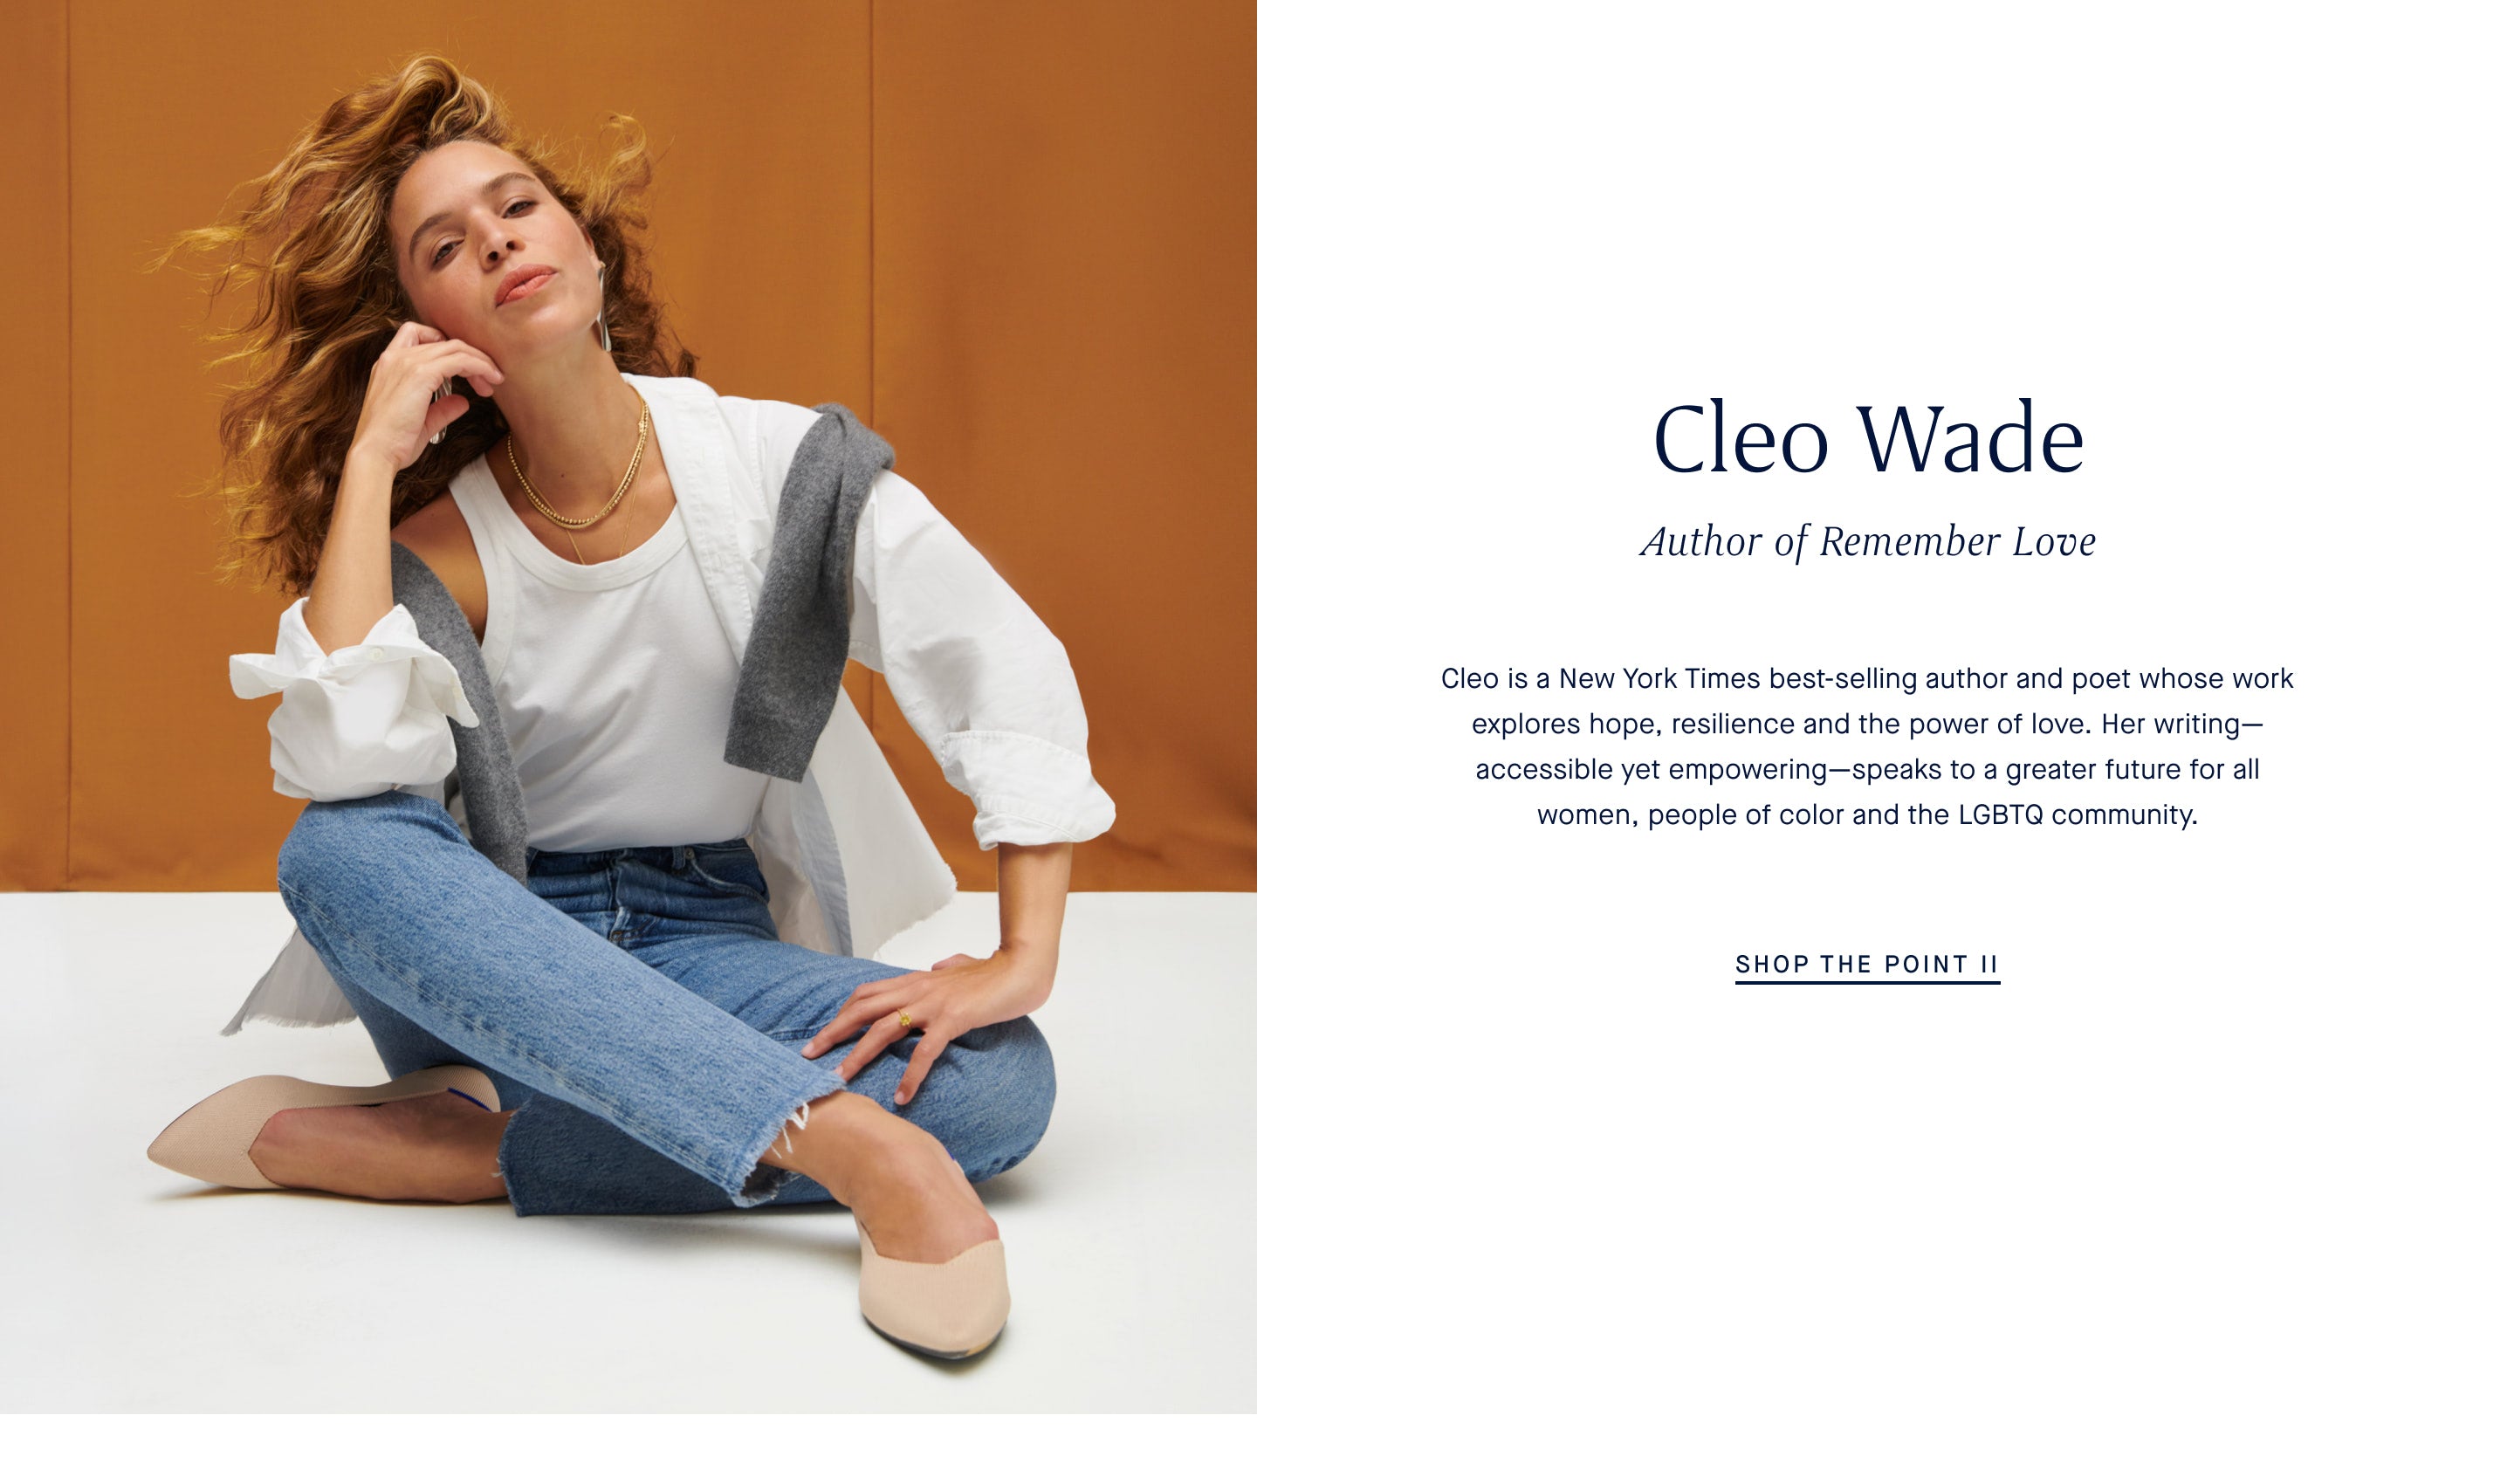 Cleo Wade Author of Remember Love Cleo is a New York Times best-selling author and poet whose work explores hope, resilience and the power of love. Her writing—accessible yet empowering—speaks to a greater future for all women, people of color and the LGBTQ community.